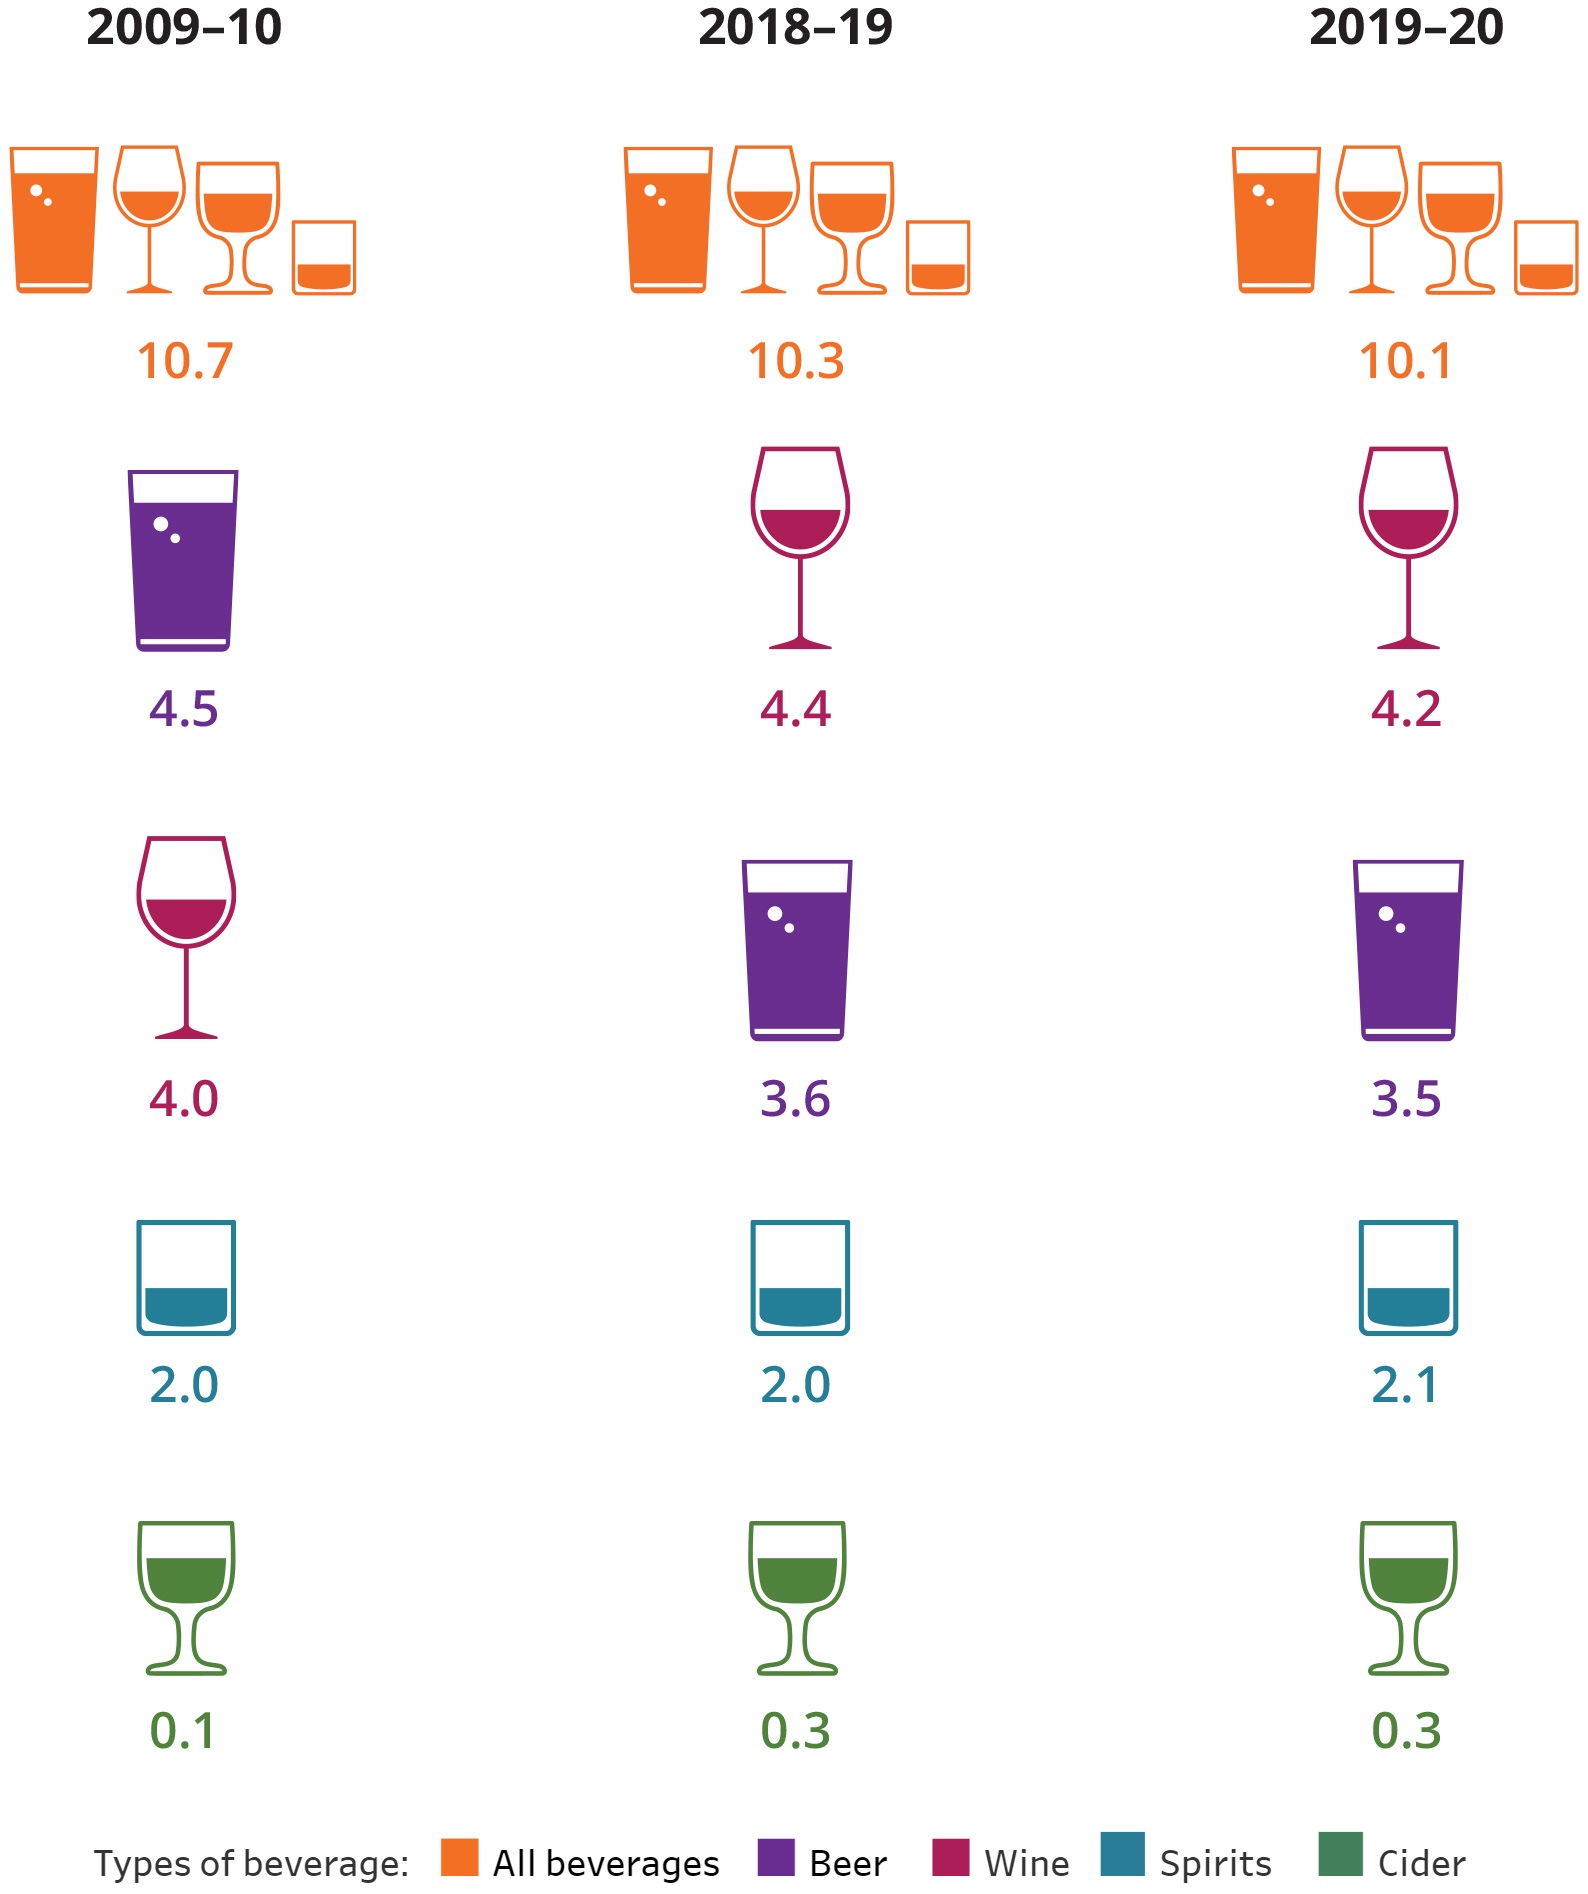 Shows the pure alcohol consumed in Australia per capita for each beverage type across three financial years. In 2019–20, people in Australia consumed 10.1 litres of pure alcohol per capita, with 4.2 litres per capita coming from wine and 3.5 litres per capita coming from beer.